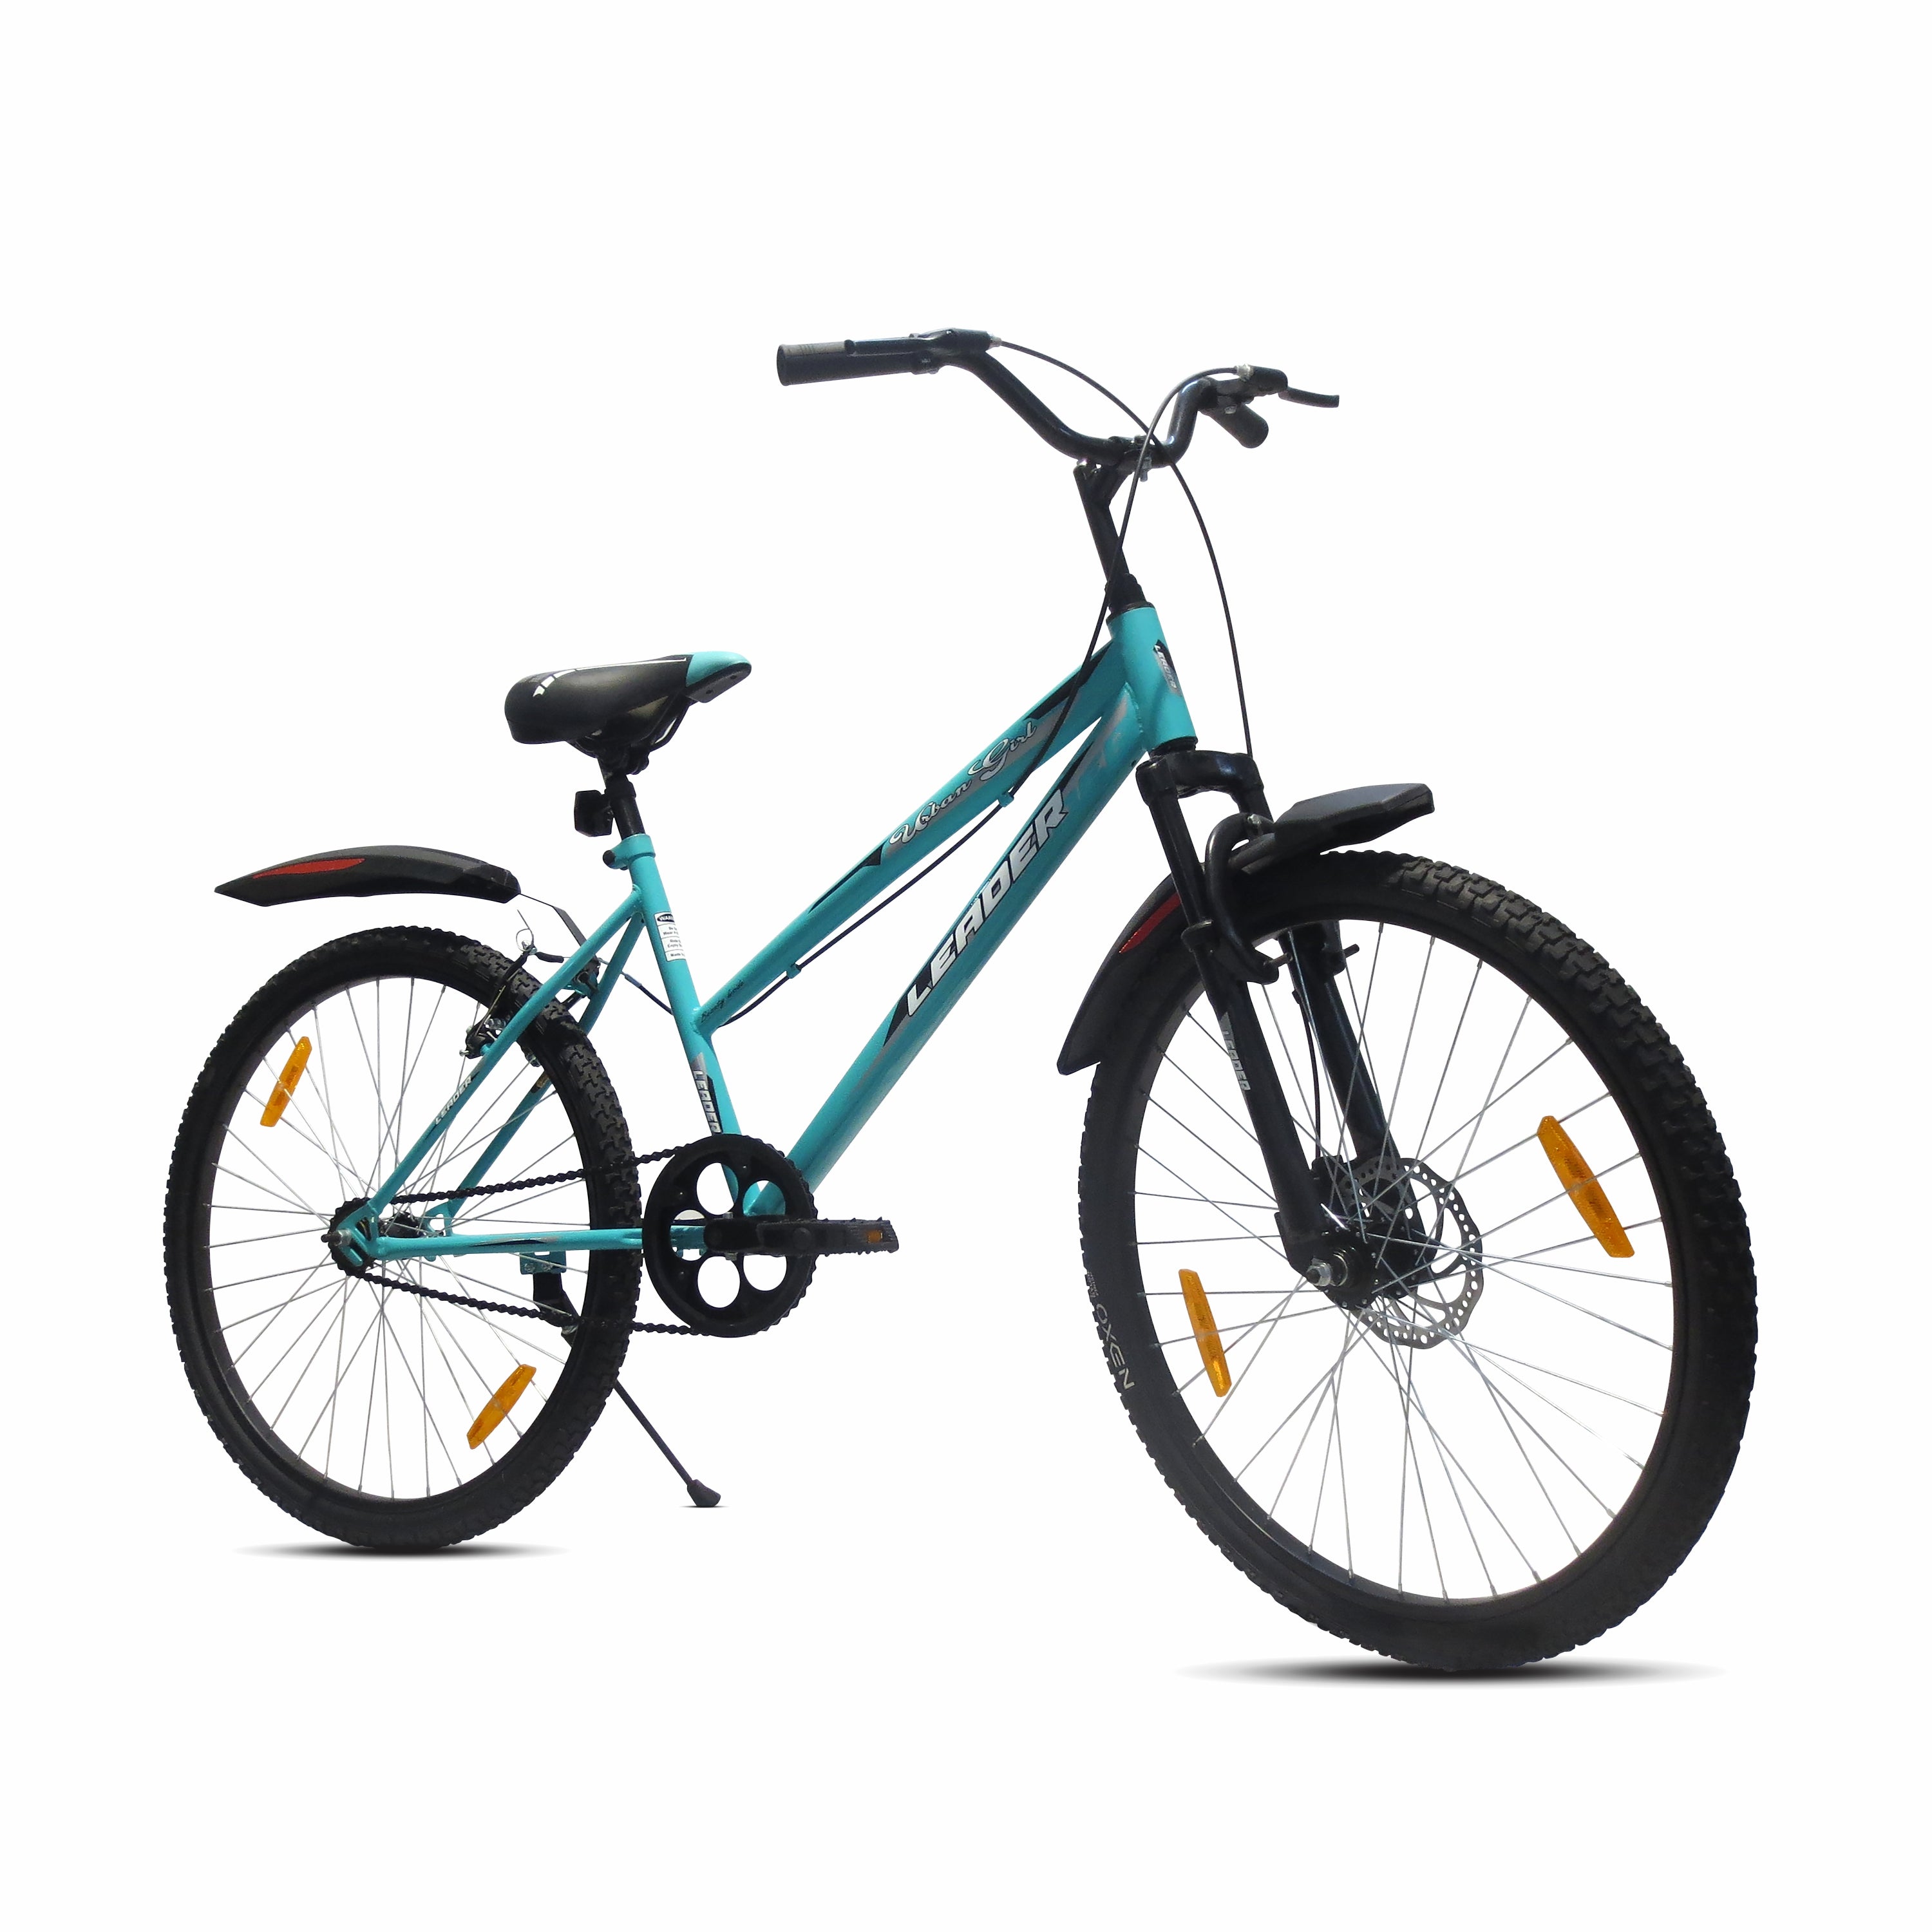 URBAN GIRL 26T WITH FRONT SUSPENSION AND DISC BRAKE